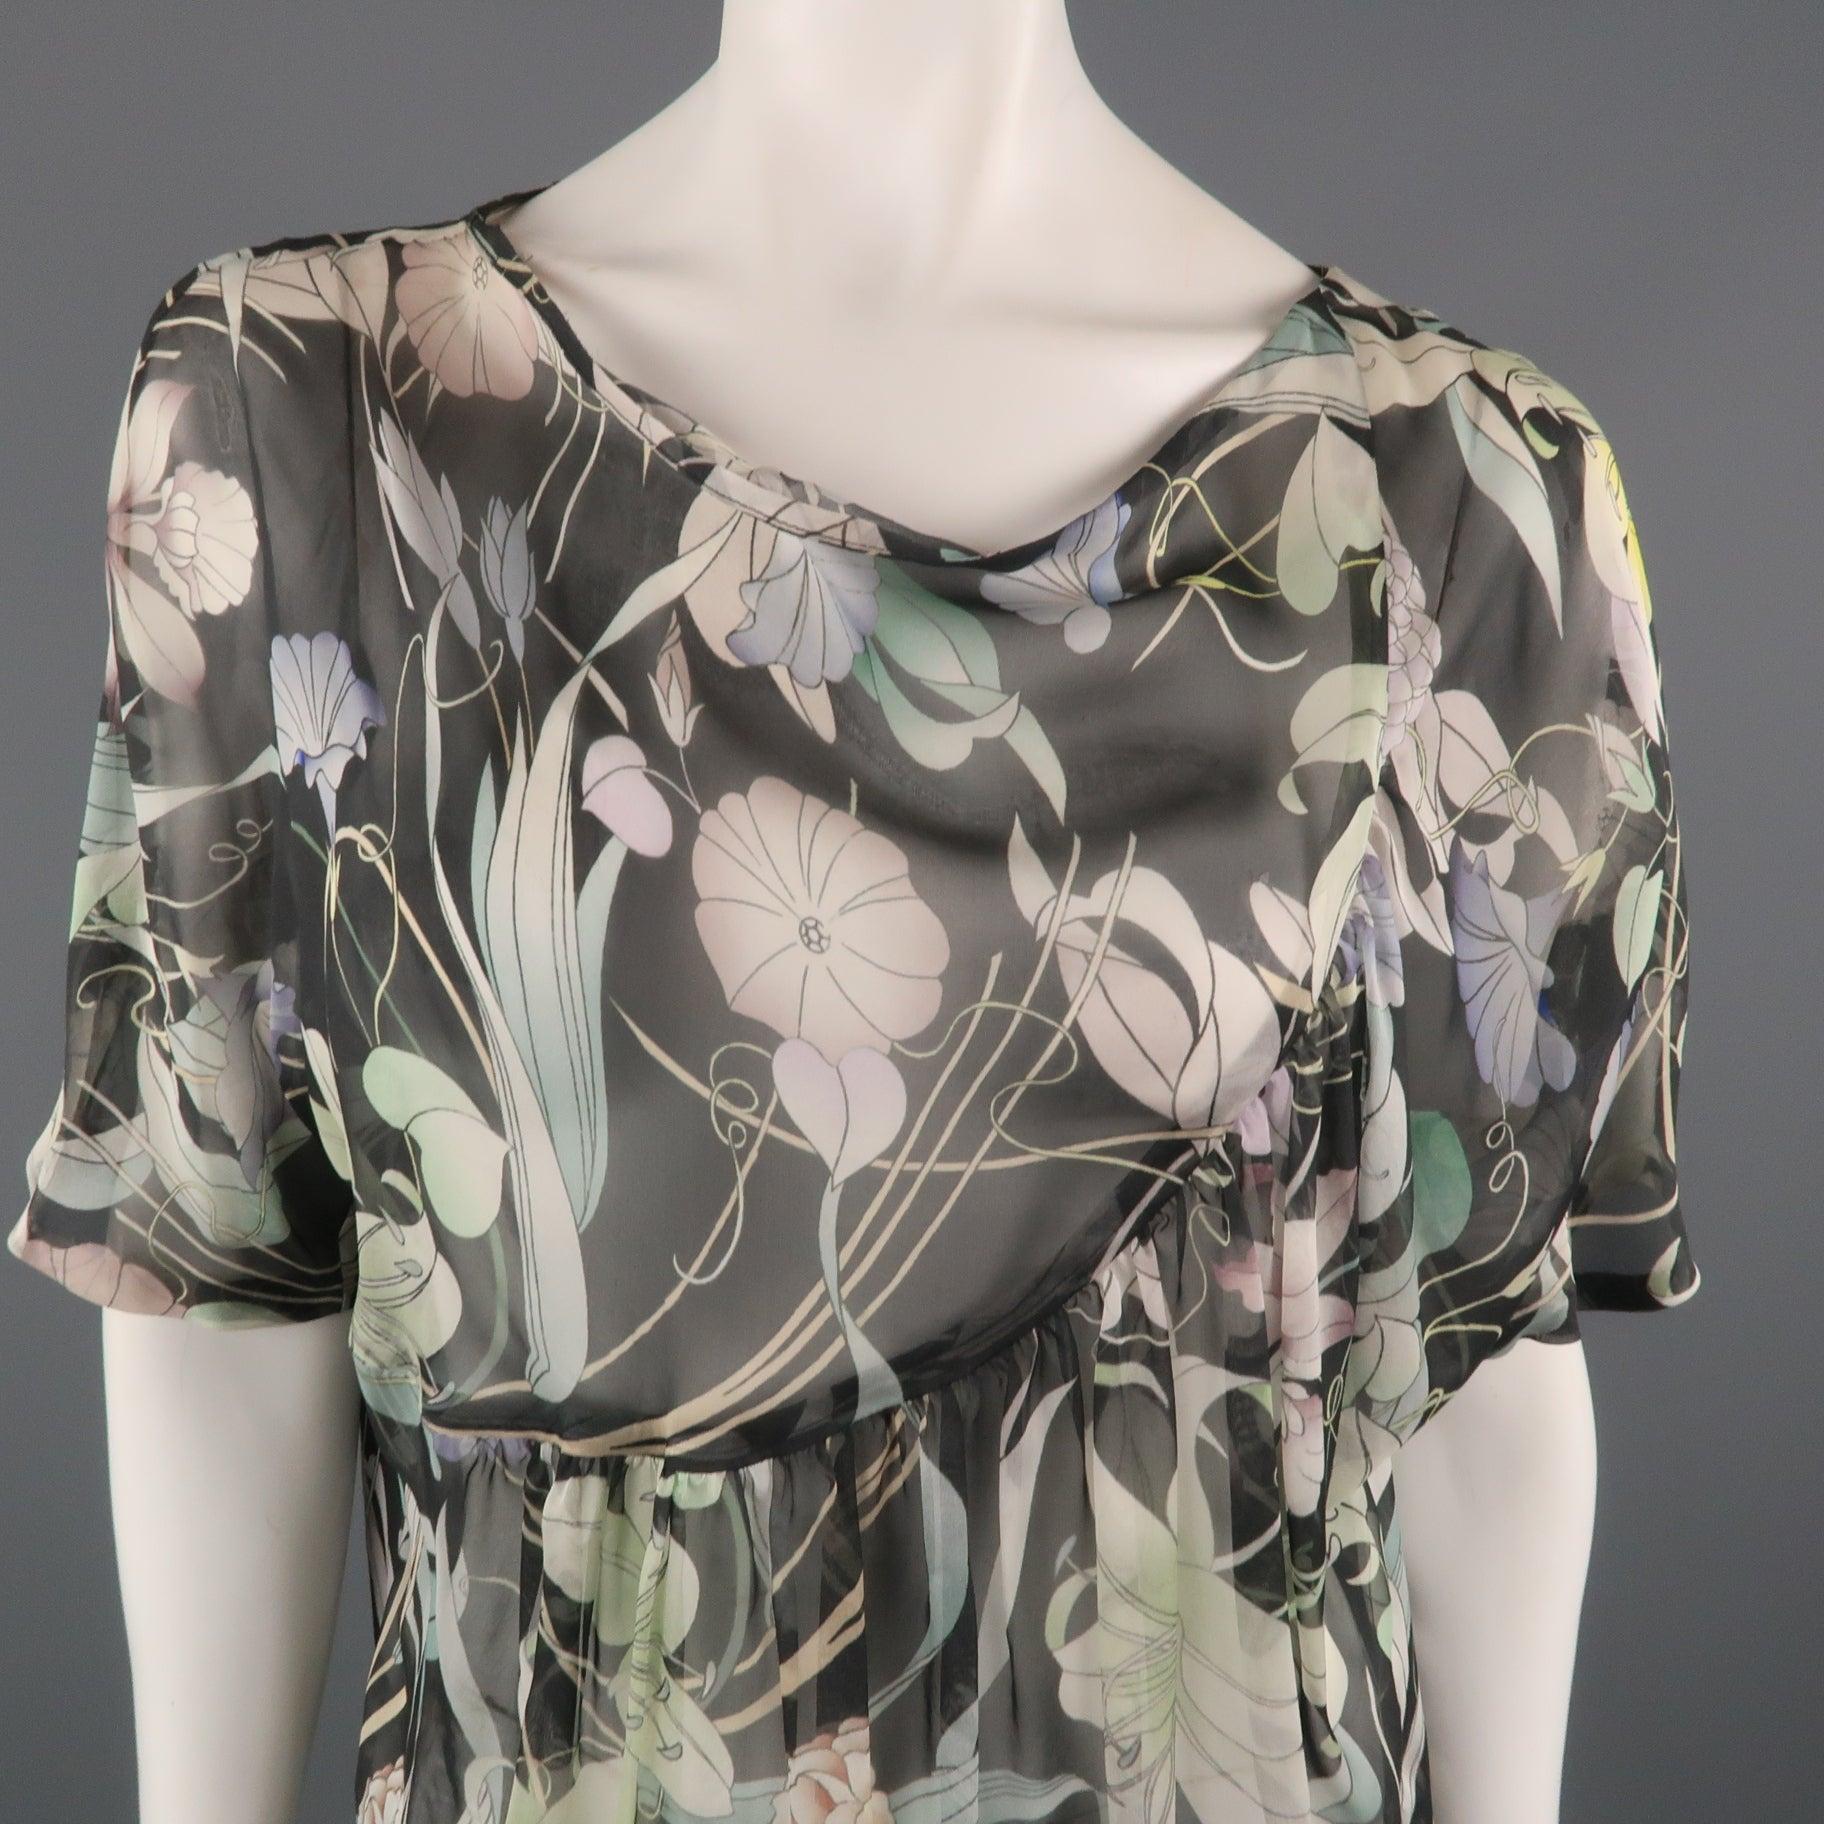 DRIES VAN NOTEN oversized blouse comes in floral print silk chiffon with a boat neck, short sleeves, and asymmetrical gathered detail. 
Excellent Pre-Owned Condition.
 

Marked:   IT 42
 

Measurements: 
  
l	Shoulder: 16 inches 
l	Bust: 48 inches